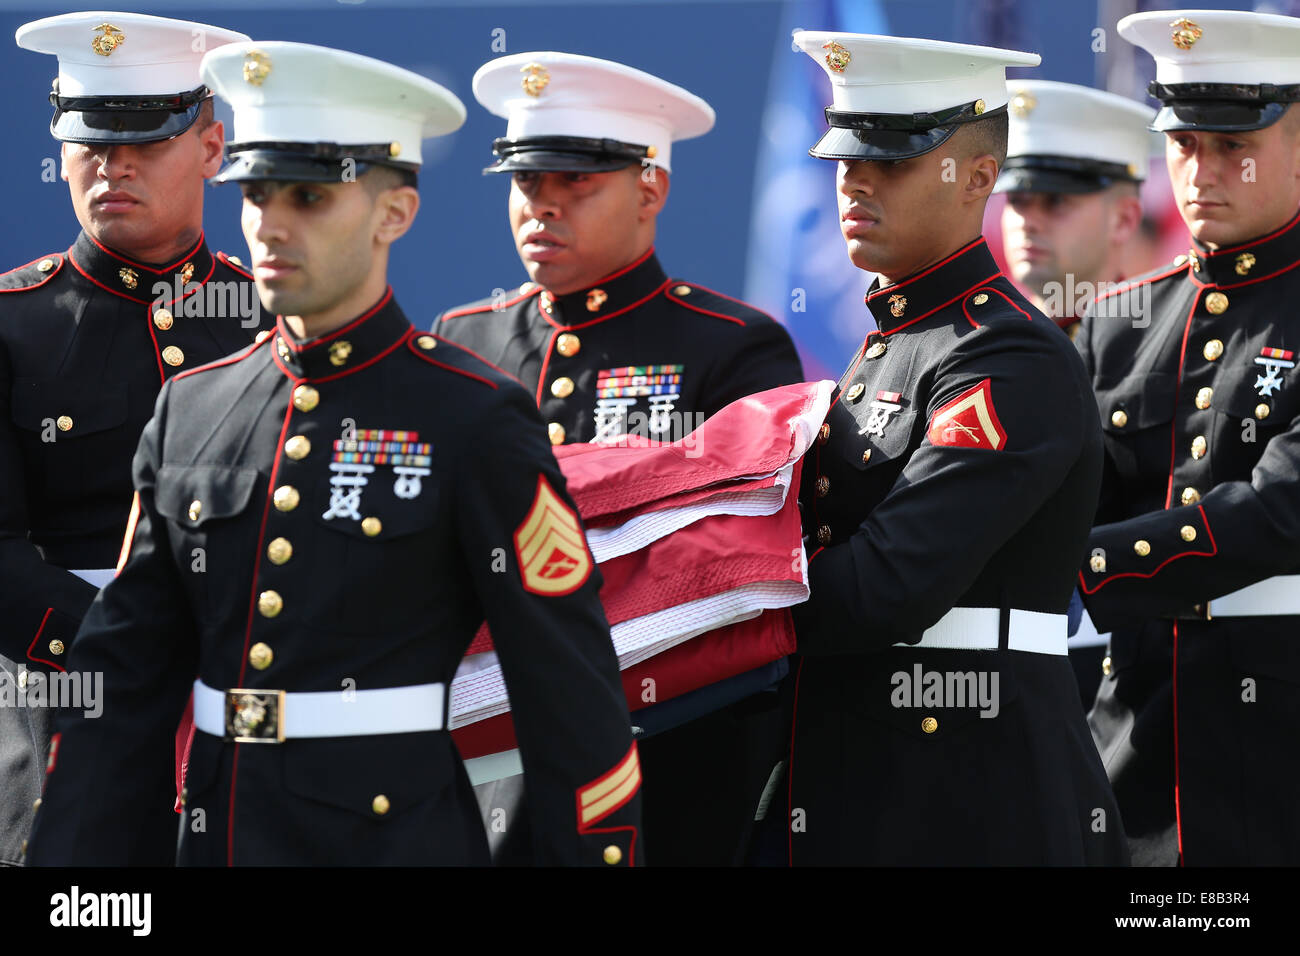 US Marine Corps unfold flag at ceremony,US Open 2014,New York,USA. Stock Photo